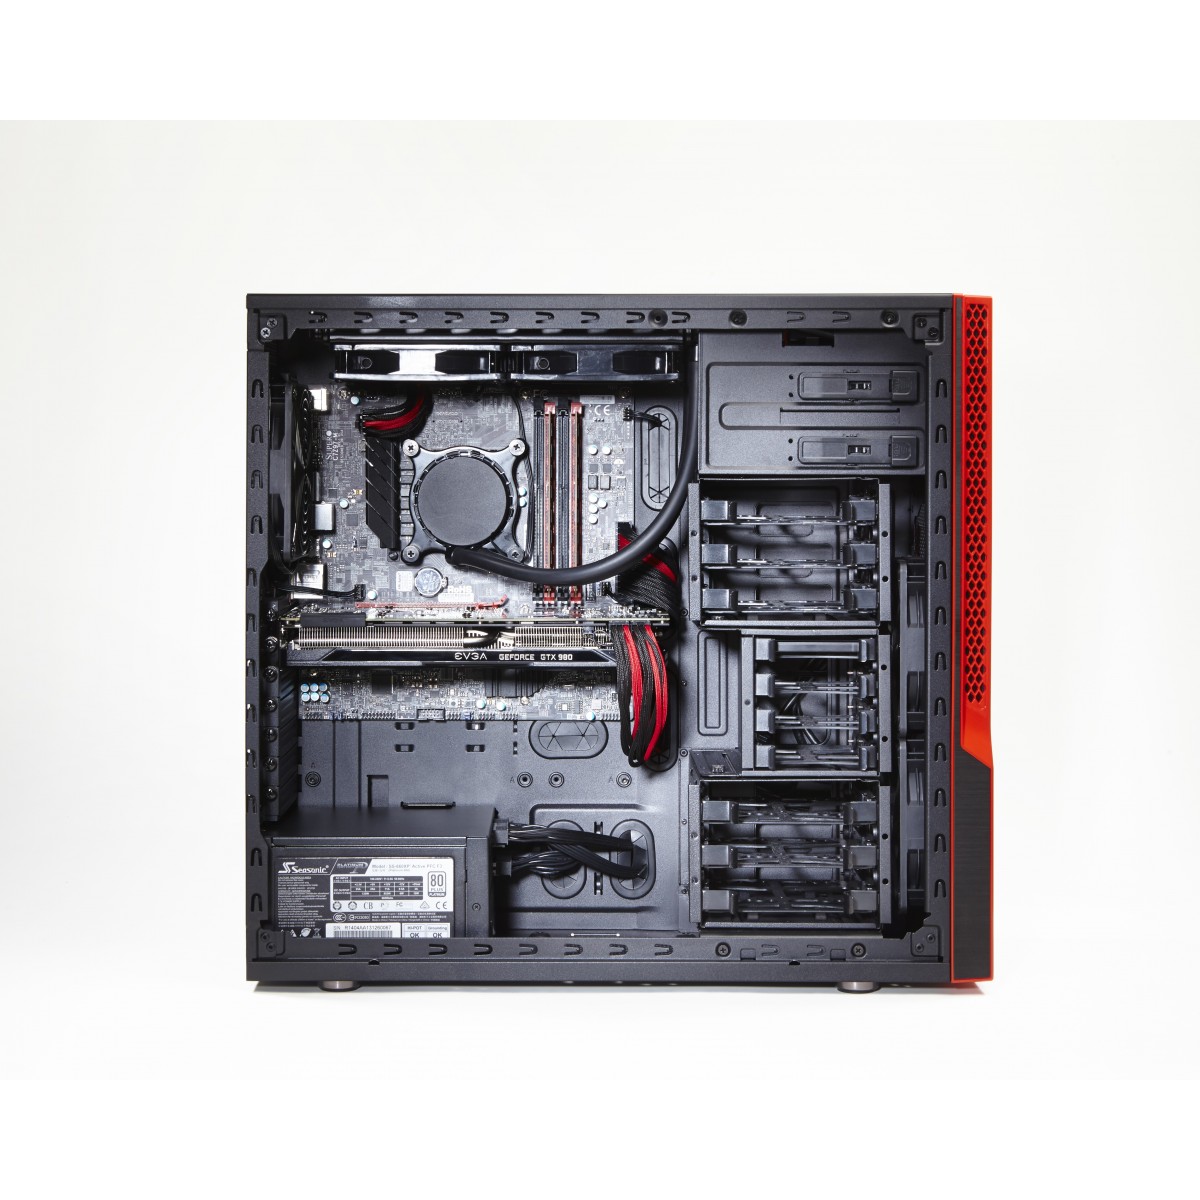 Supermicro S5 Special Edition GS5B-000R Mid-Tower Workstation / Gaming Case - Midi Tower - PC - ABS synthetics - Aluminum - SGCC